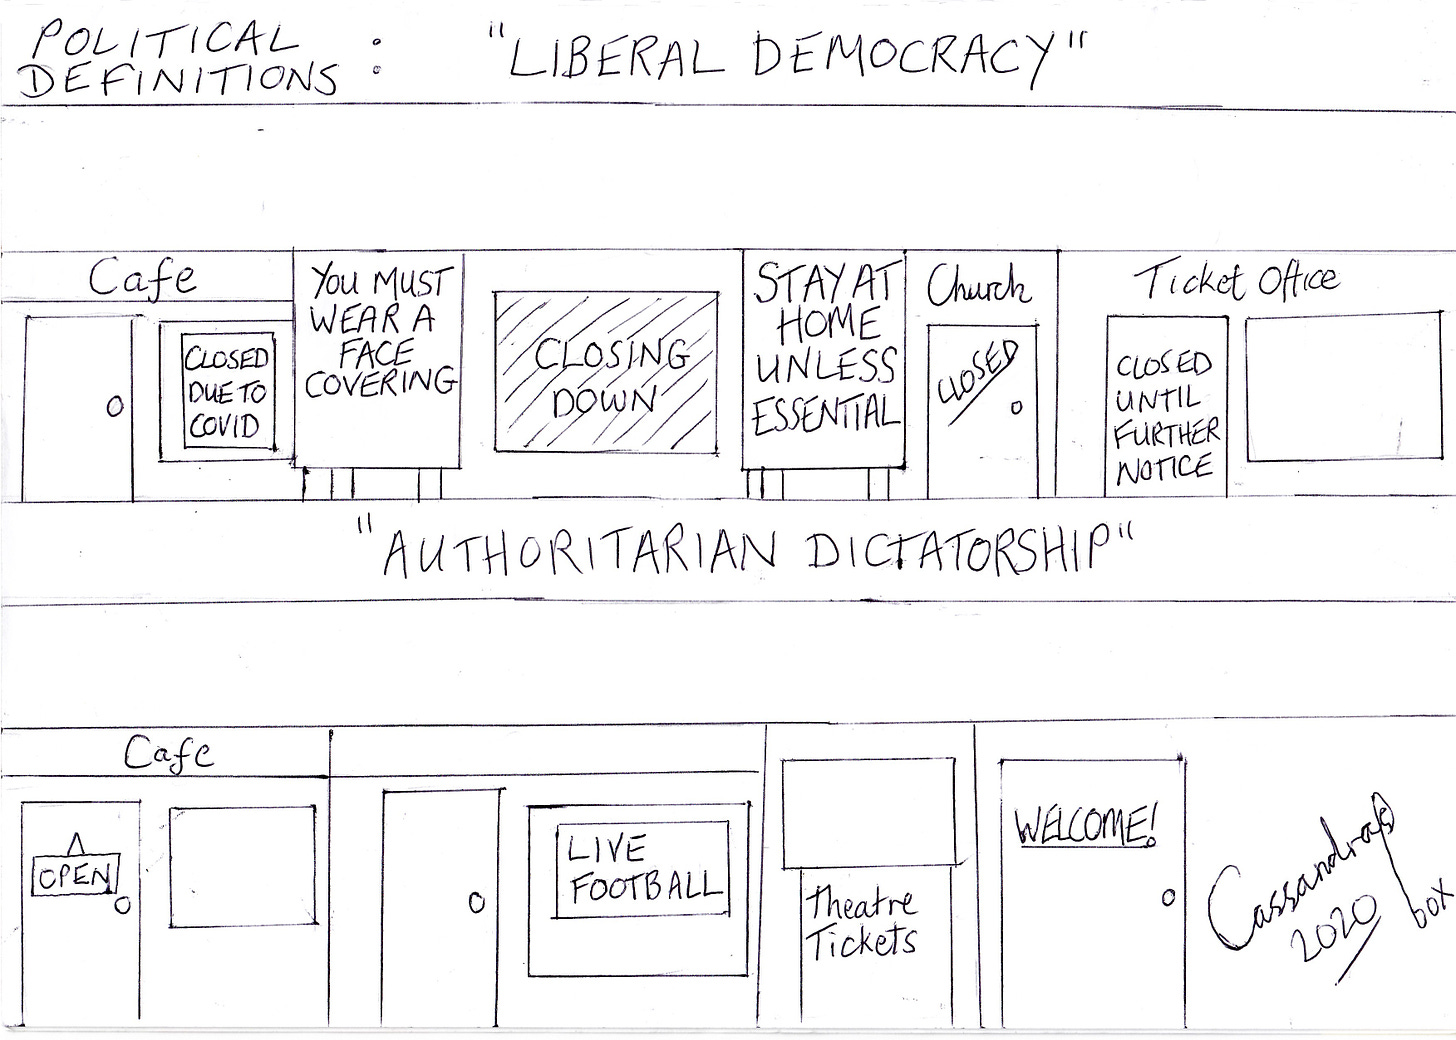 Cartoon: Top banner reads 'Political definitions: Liberal democracy' Shows row of shops with banners "Closed due to Covid, you must wear a face covering, closing down, stay home unless essential, closed until further notice" Below that reads: Authoritarian dictatorship showing row of open shops and pub showing live football